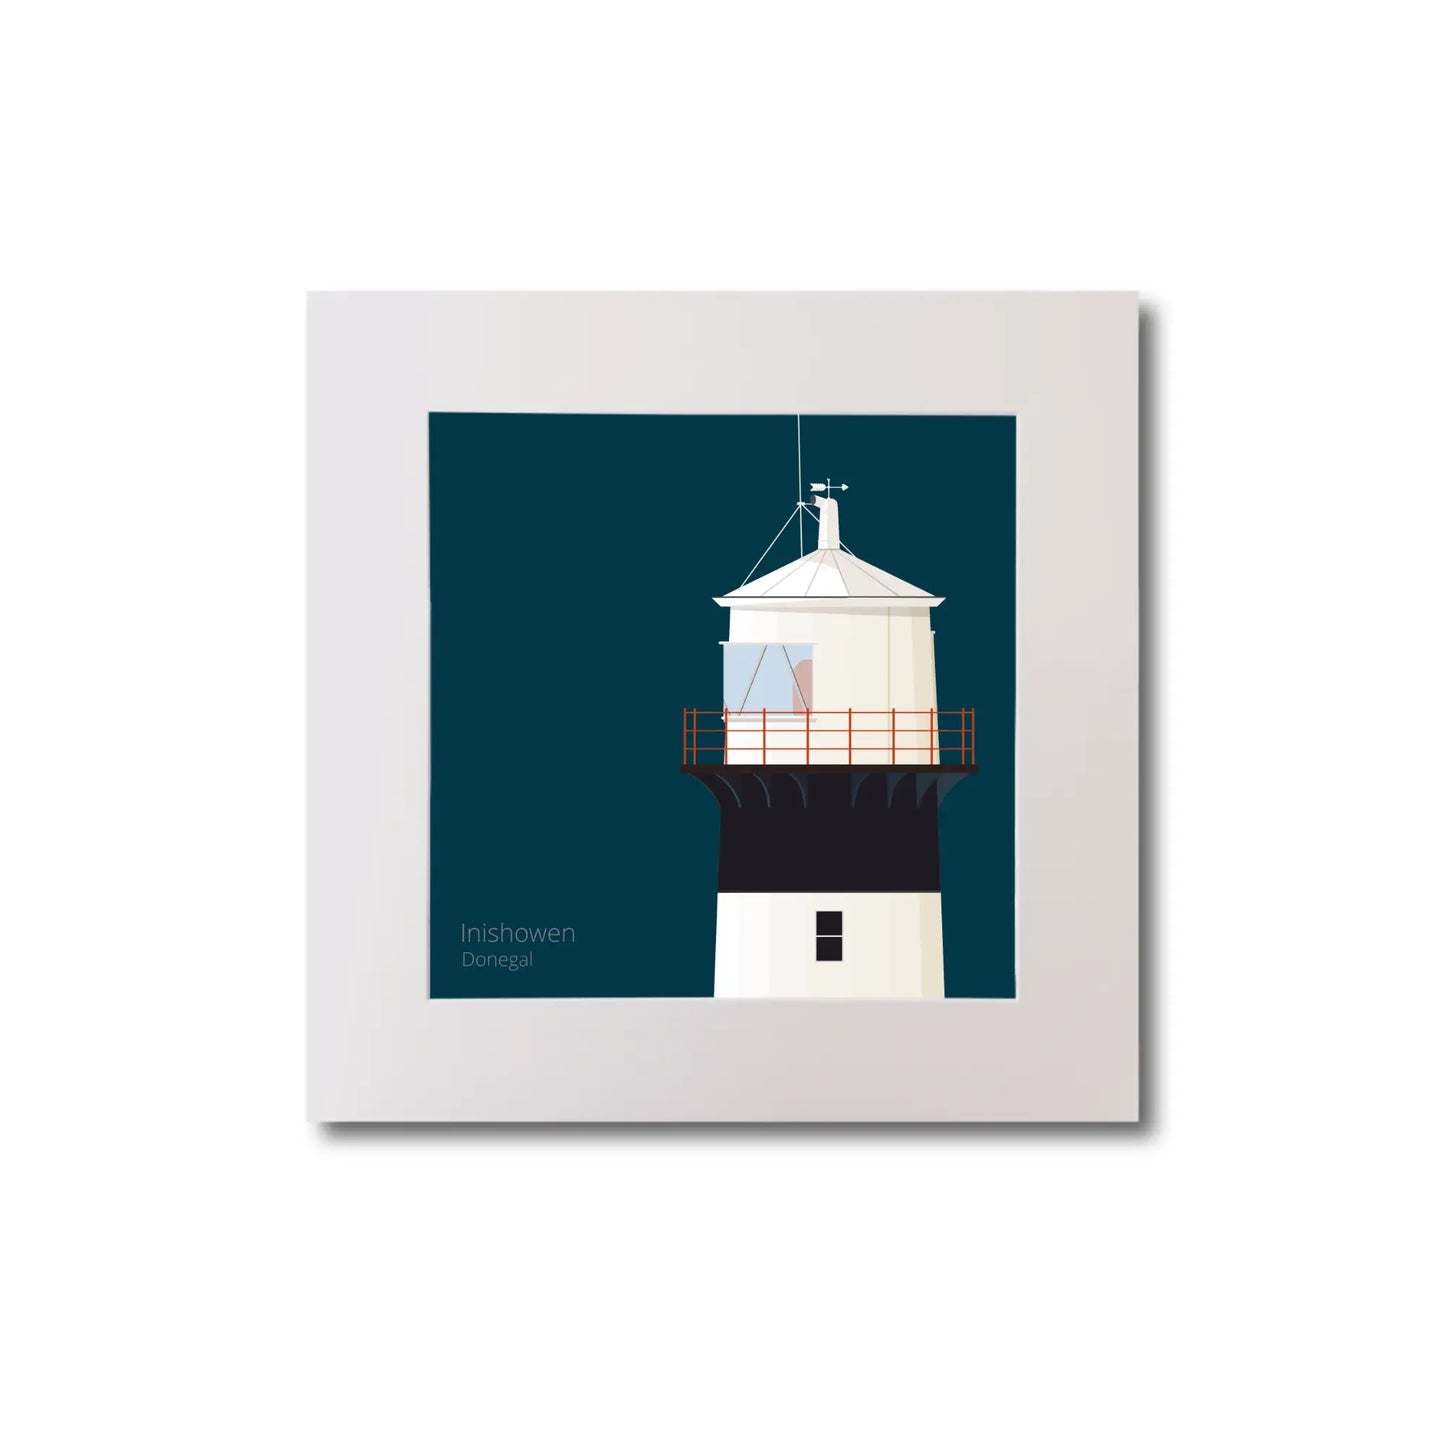 Illustration of inishowen lighthouse on a midnight blue background, mounted and measuring 20x20cm.